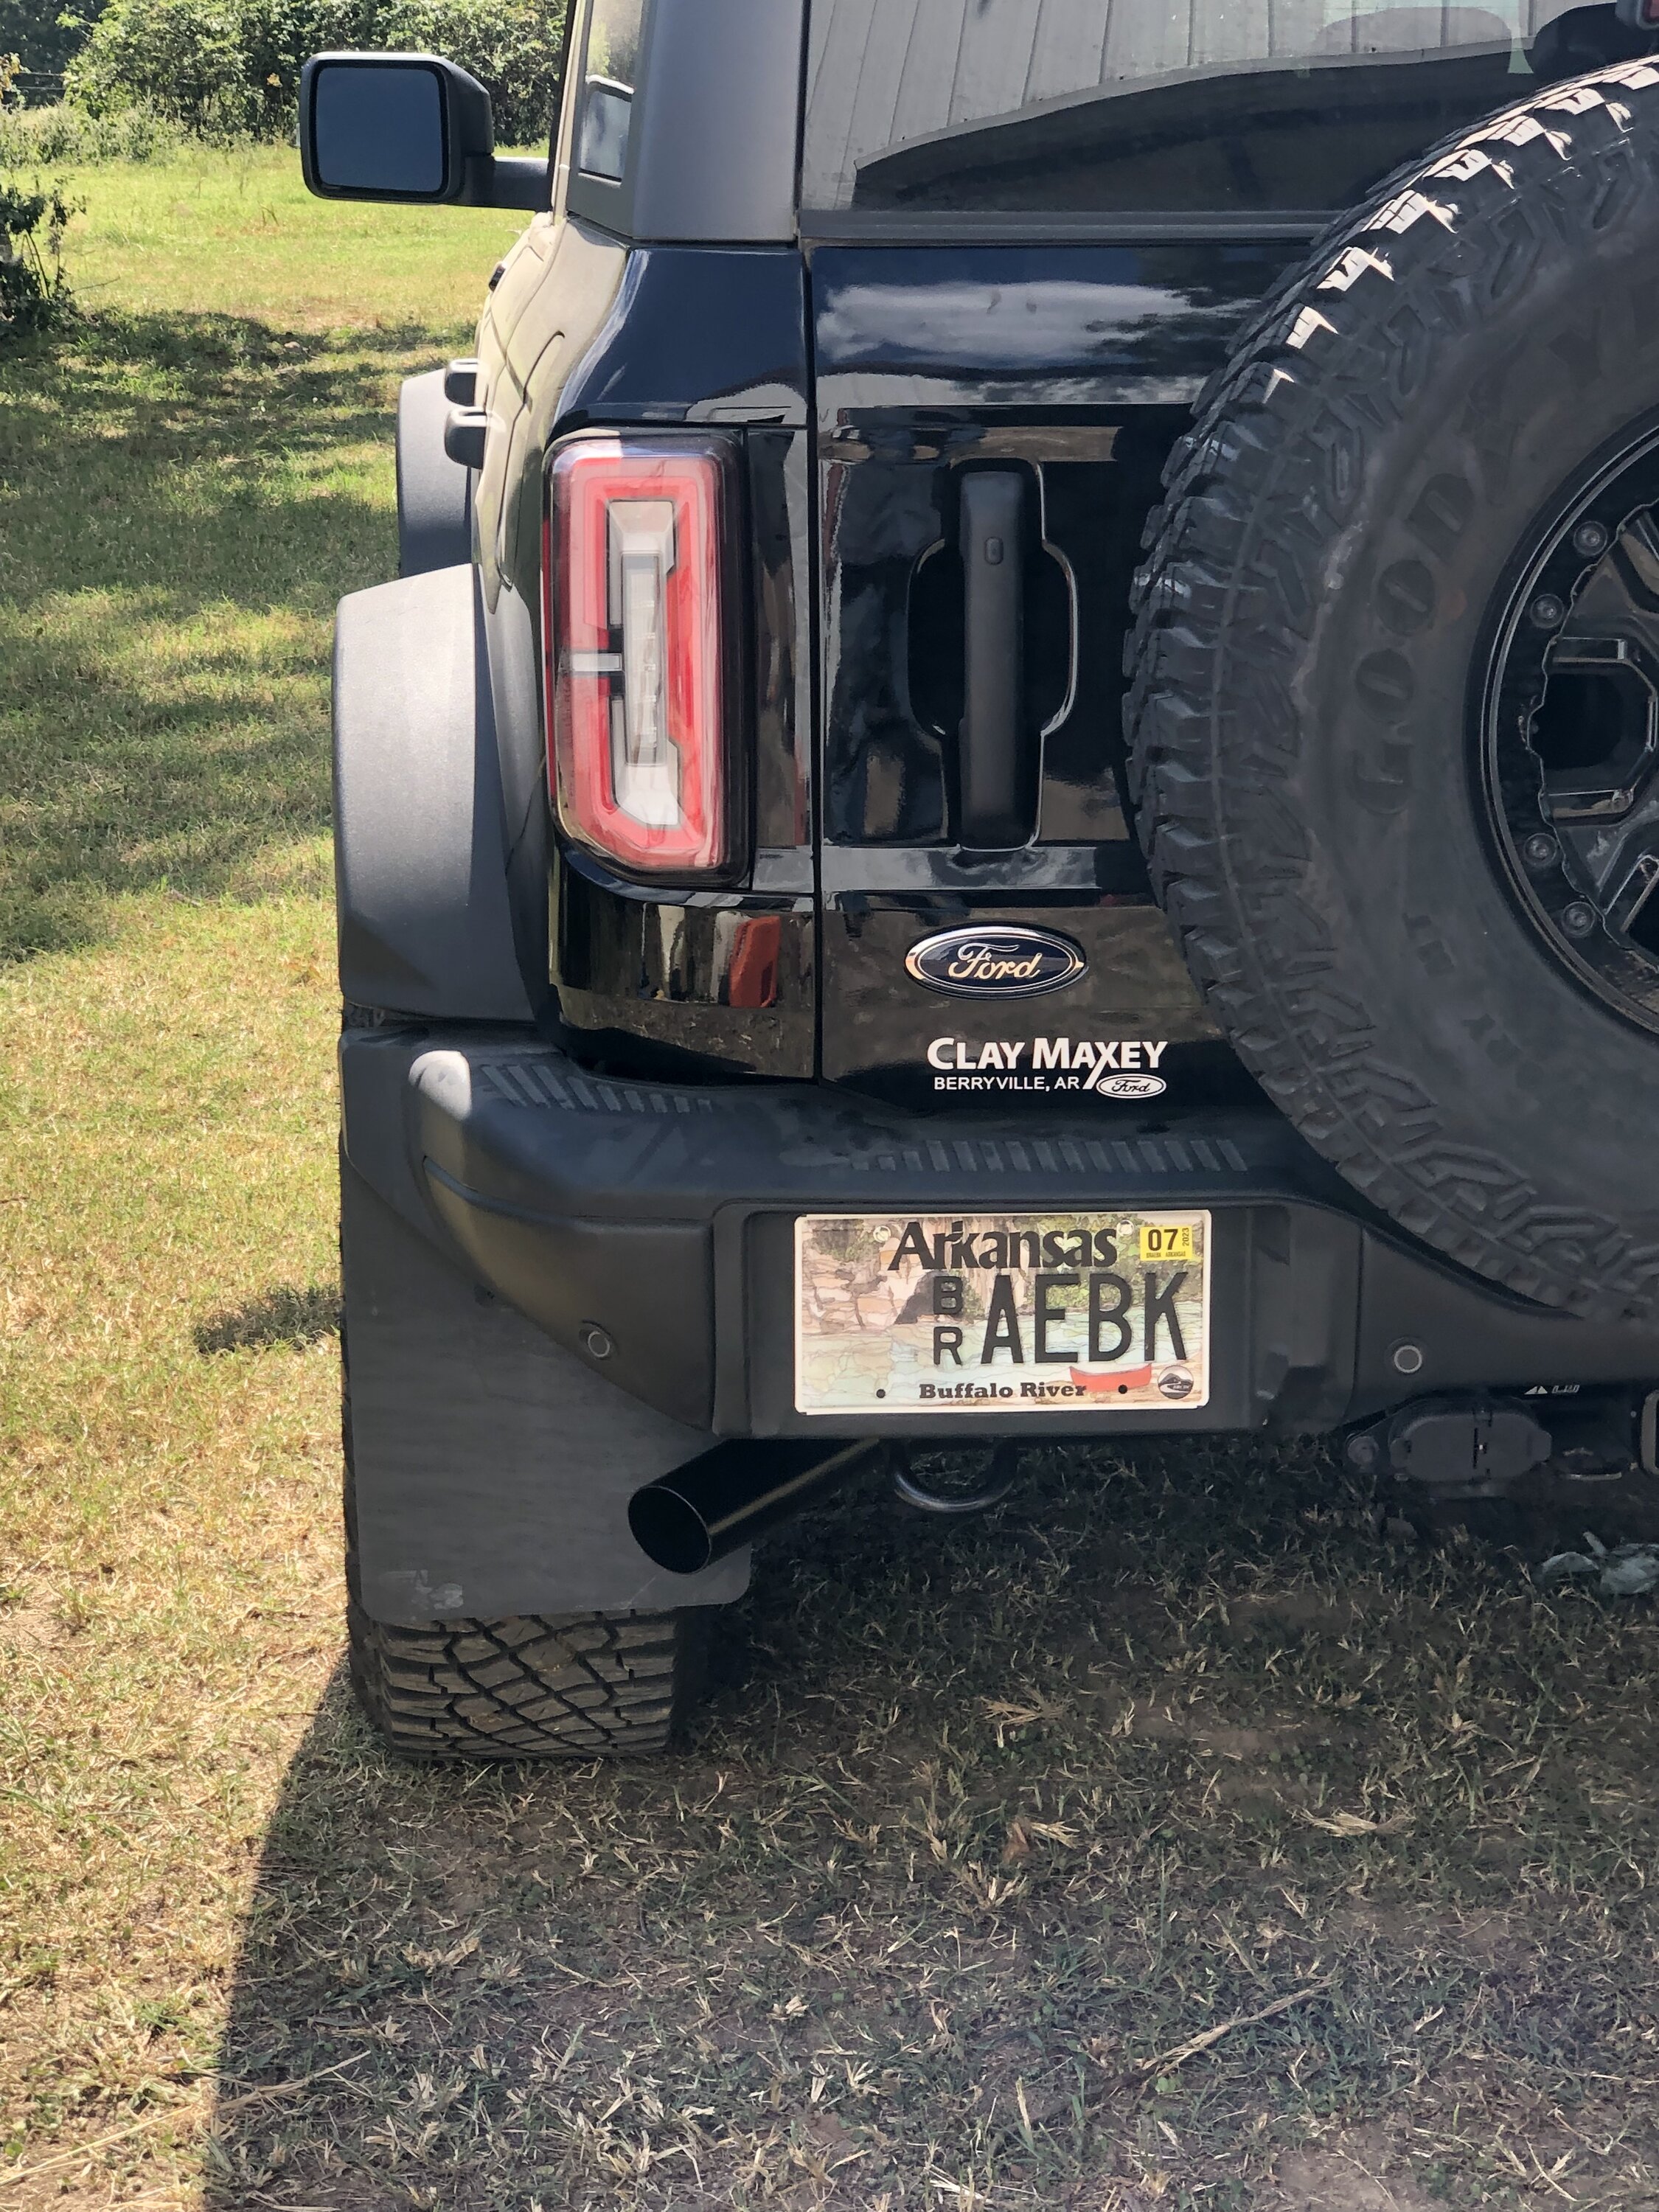 Ford Bronco Bronco Raptor hitch DIY install with pictures ED8A49CD-437B-4DB2-98A3-AE8C09CEEE2D